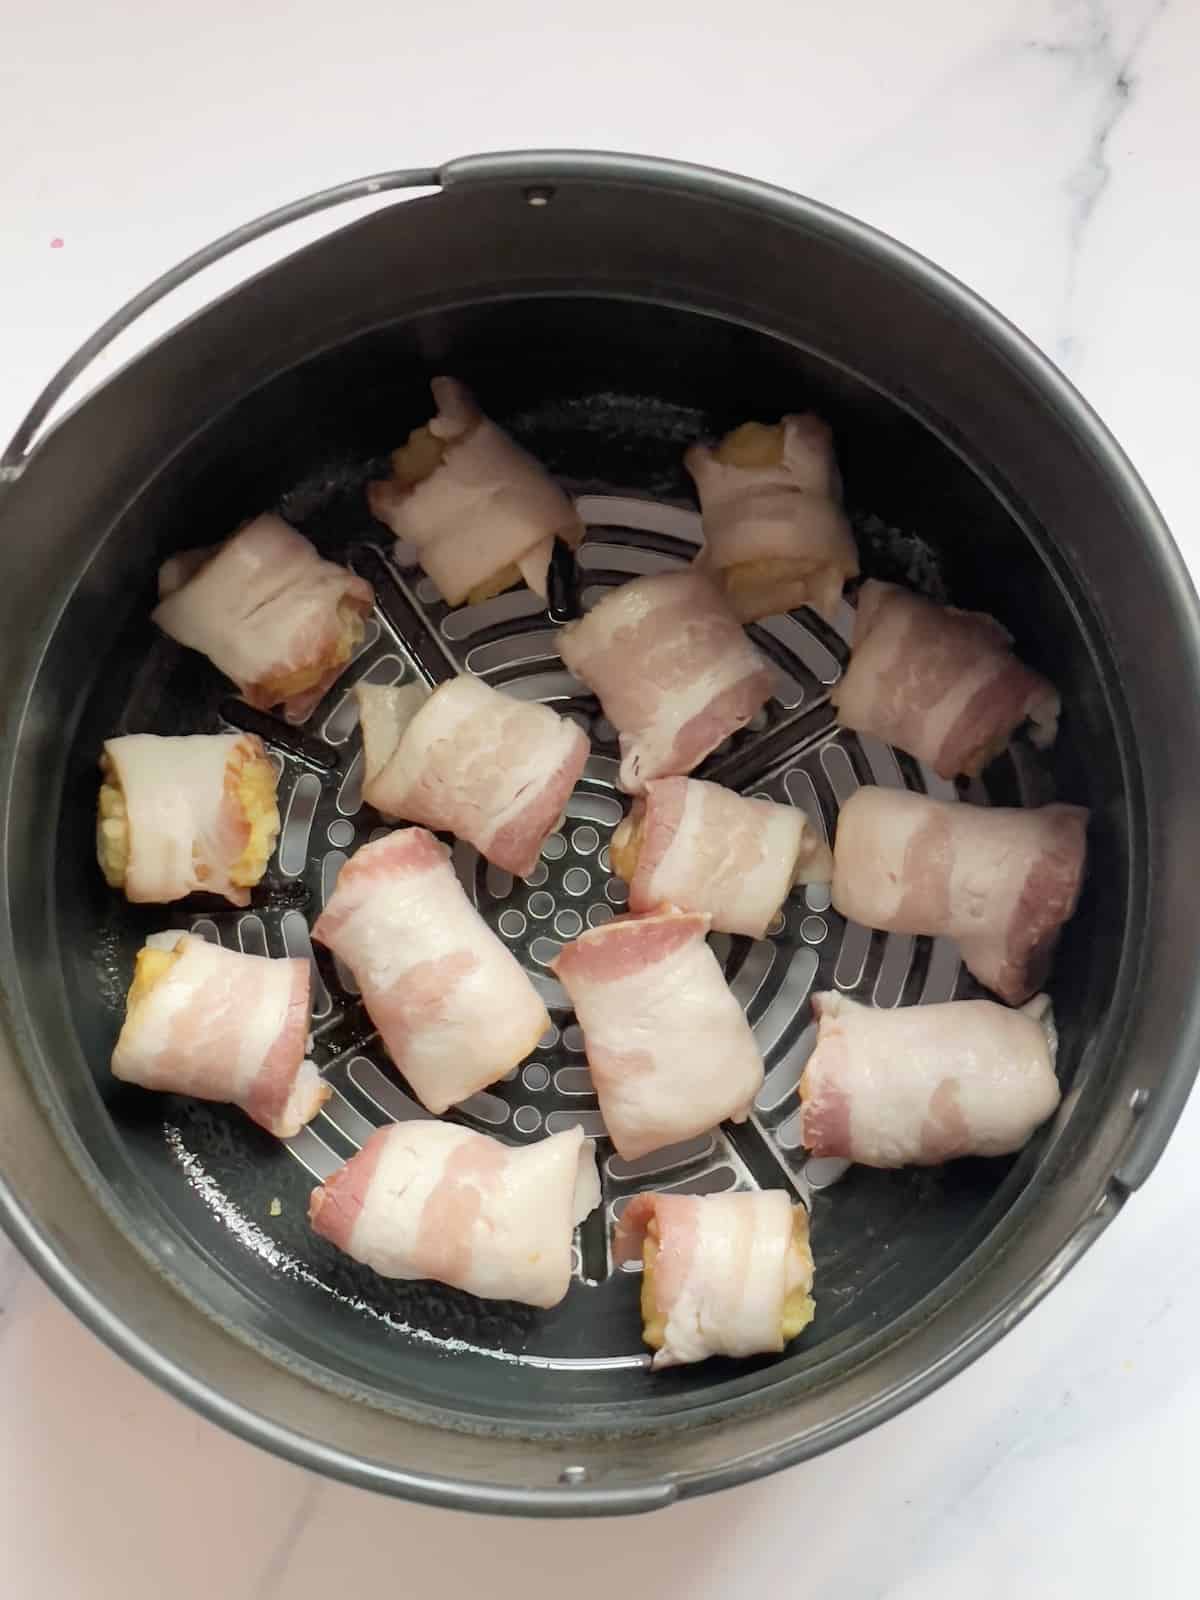 uncooked bacon wrapped tater tots in an air fryer basket